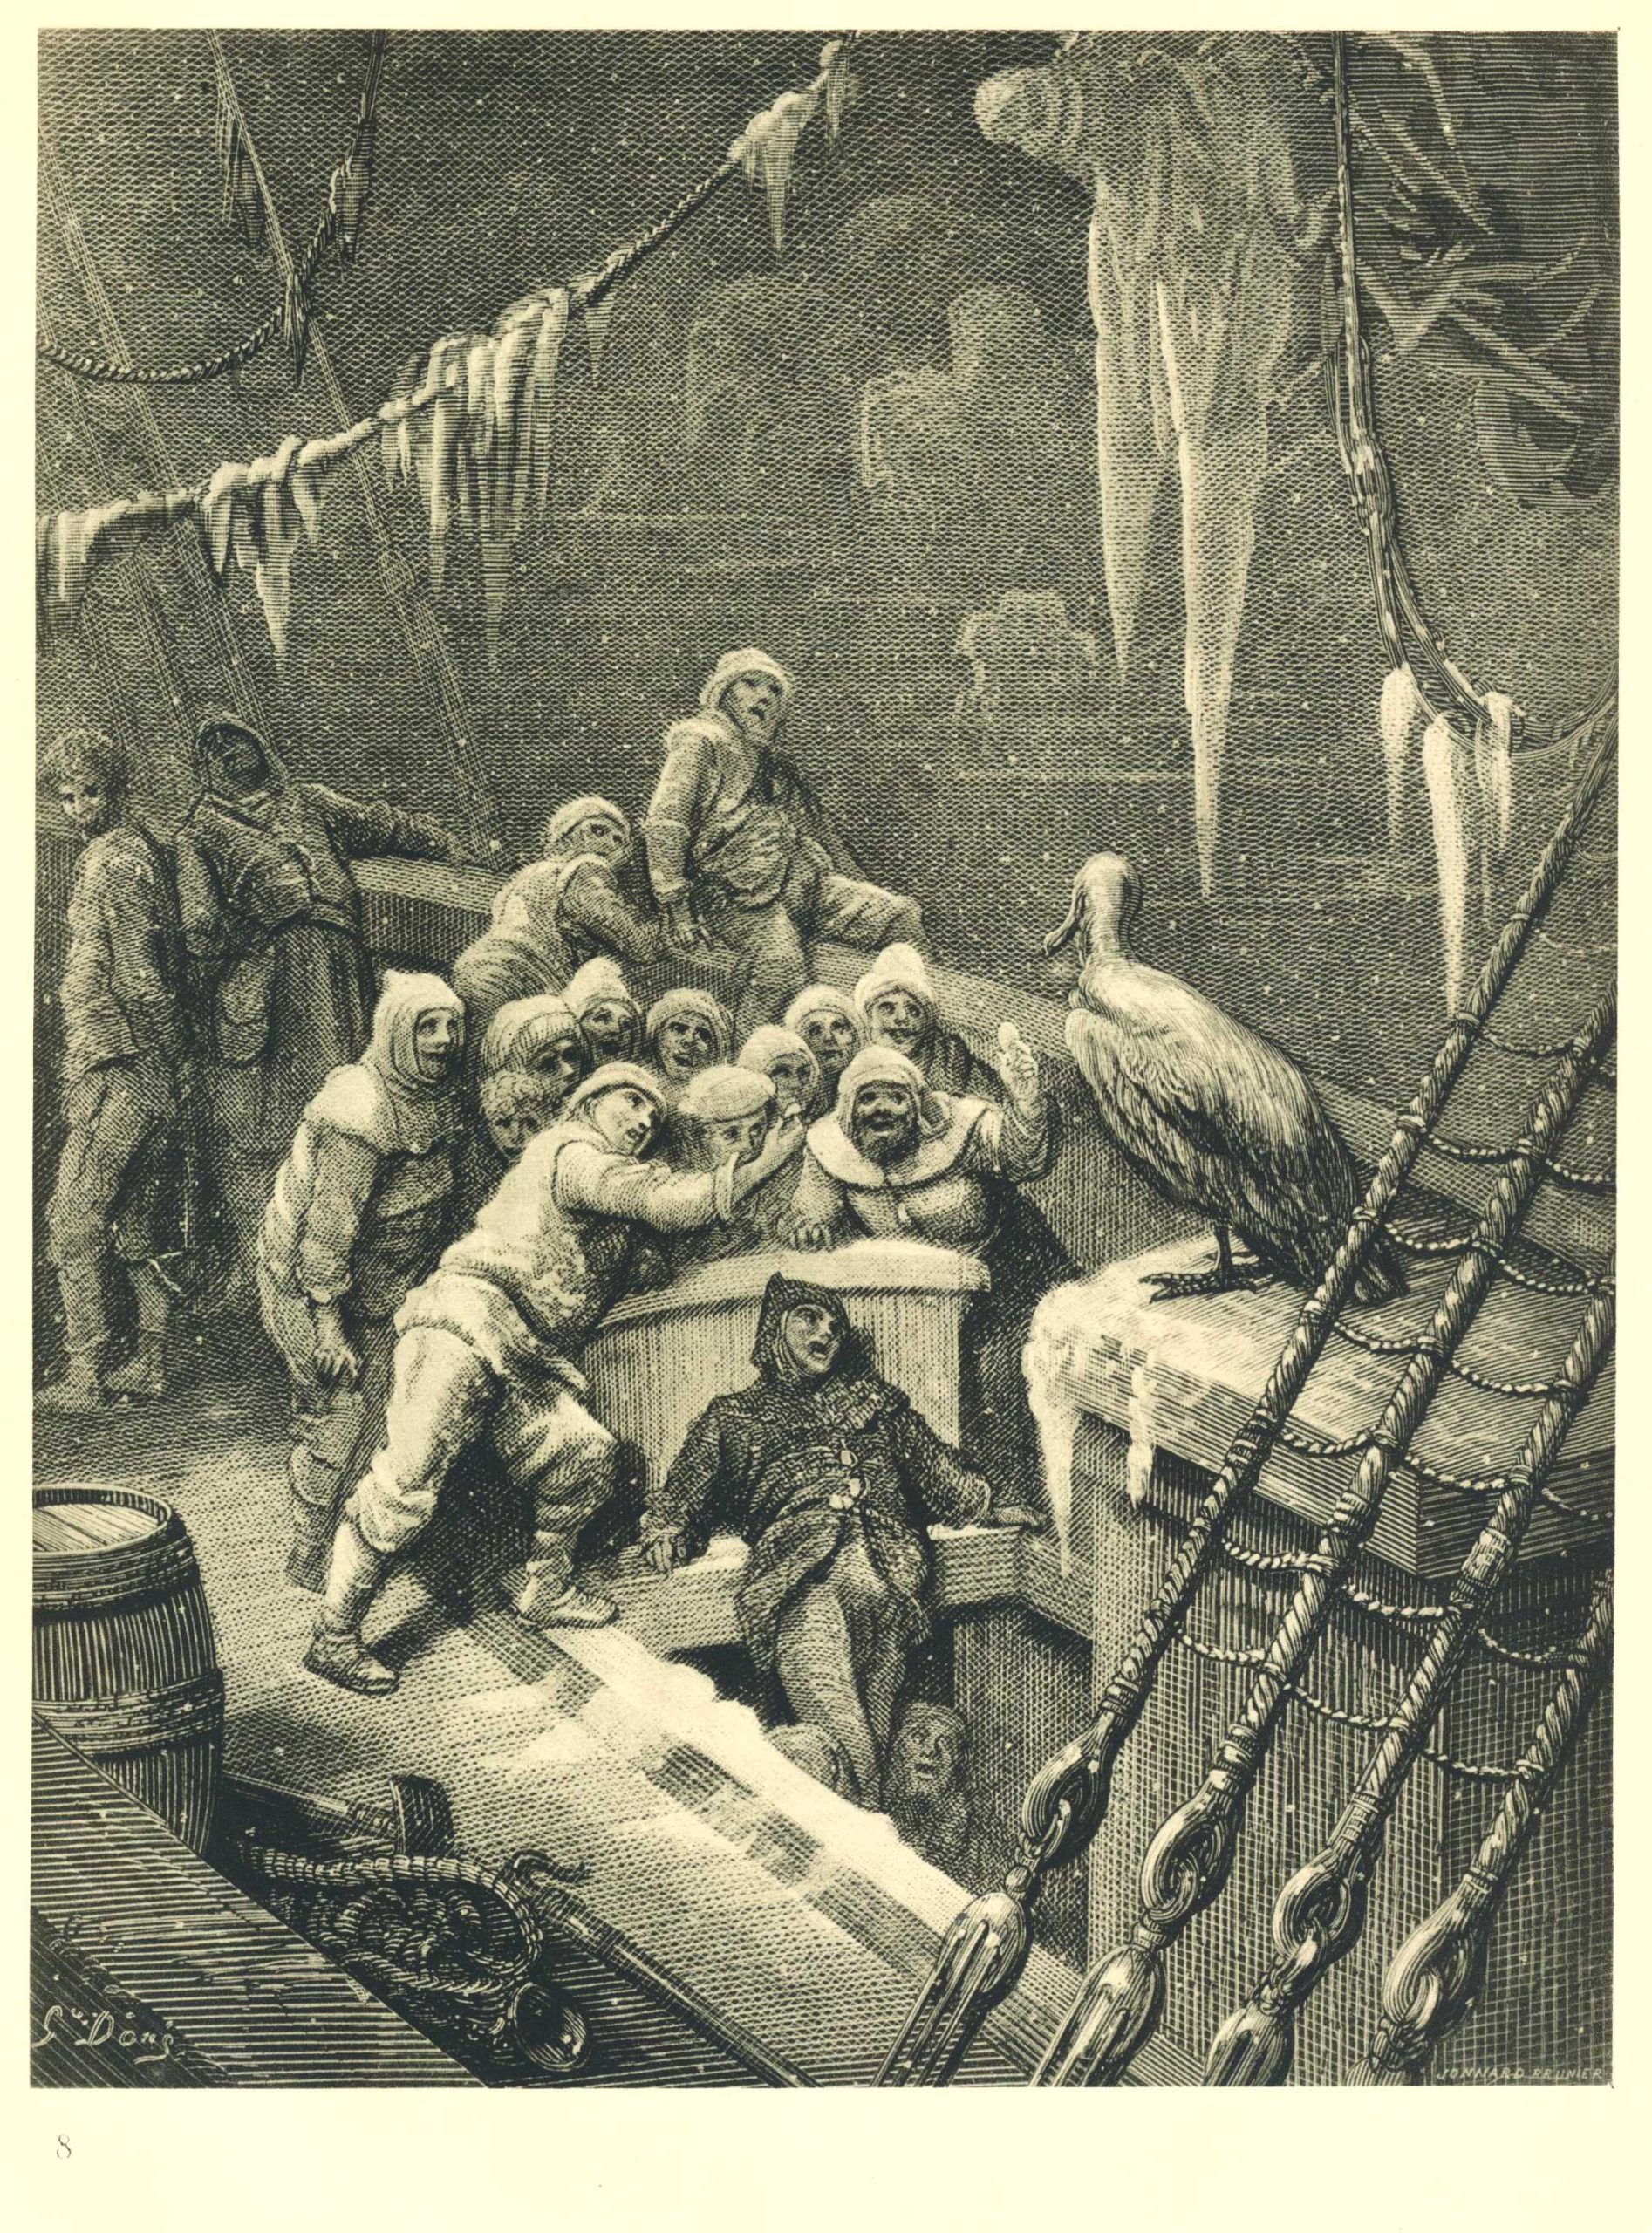 A crew of sailors cowering at the presence of an albatross on their ship